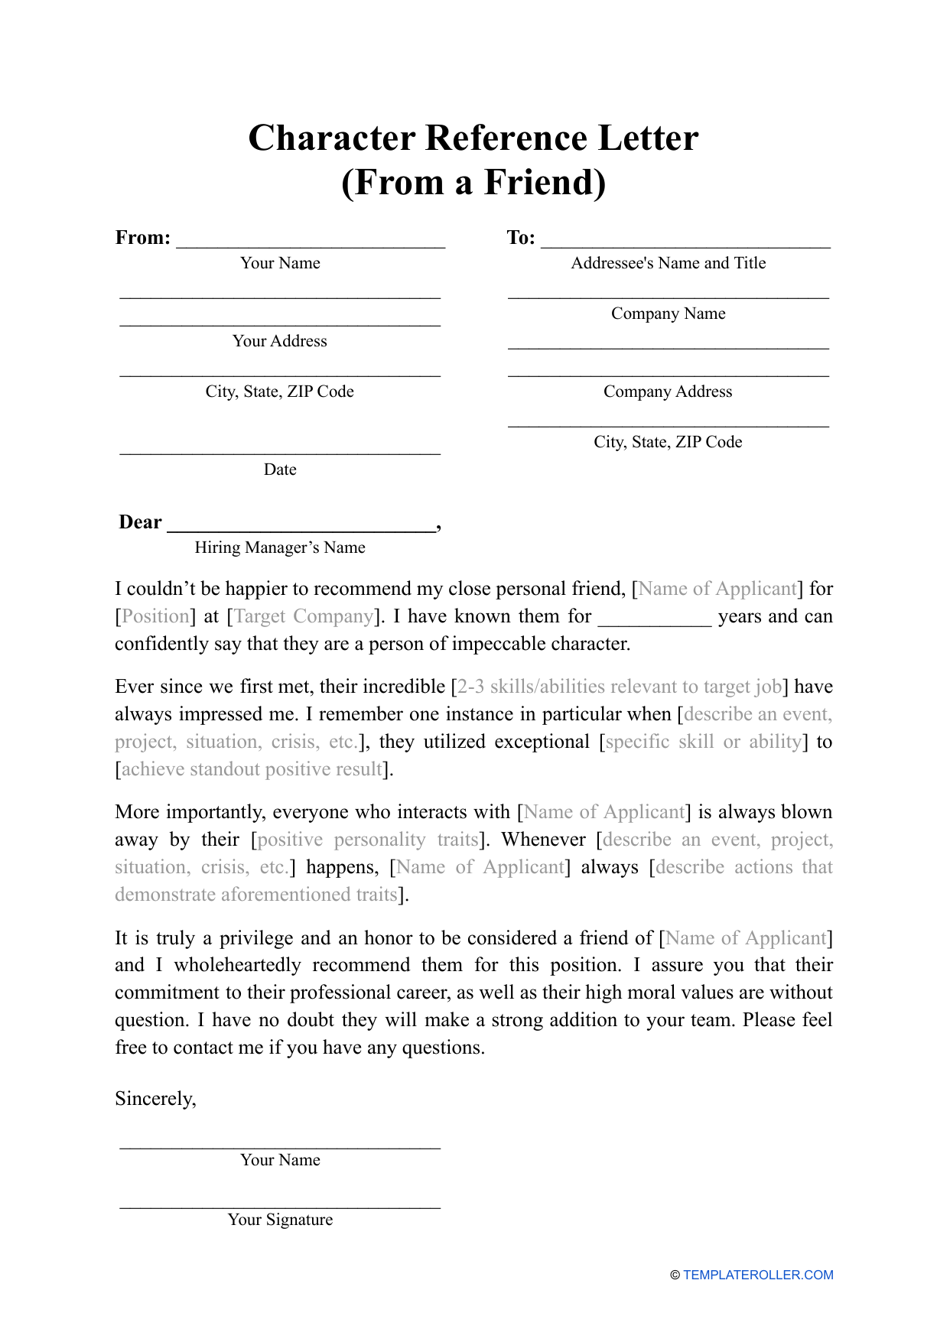 Character Reference Letter From A Friend Download Printable Pdf Templateroller